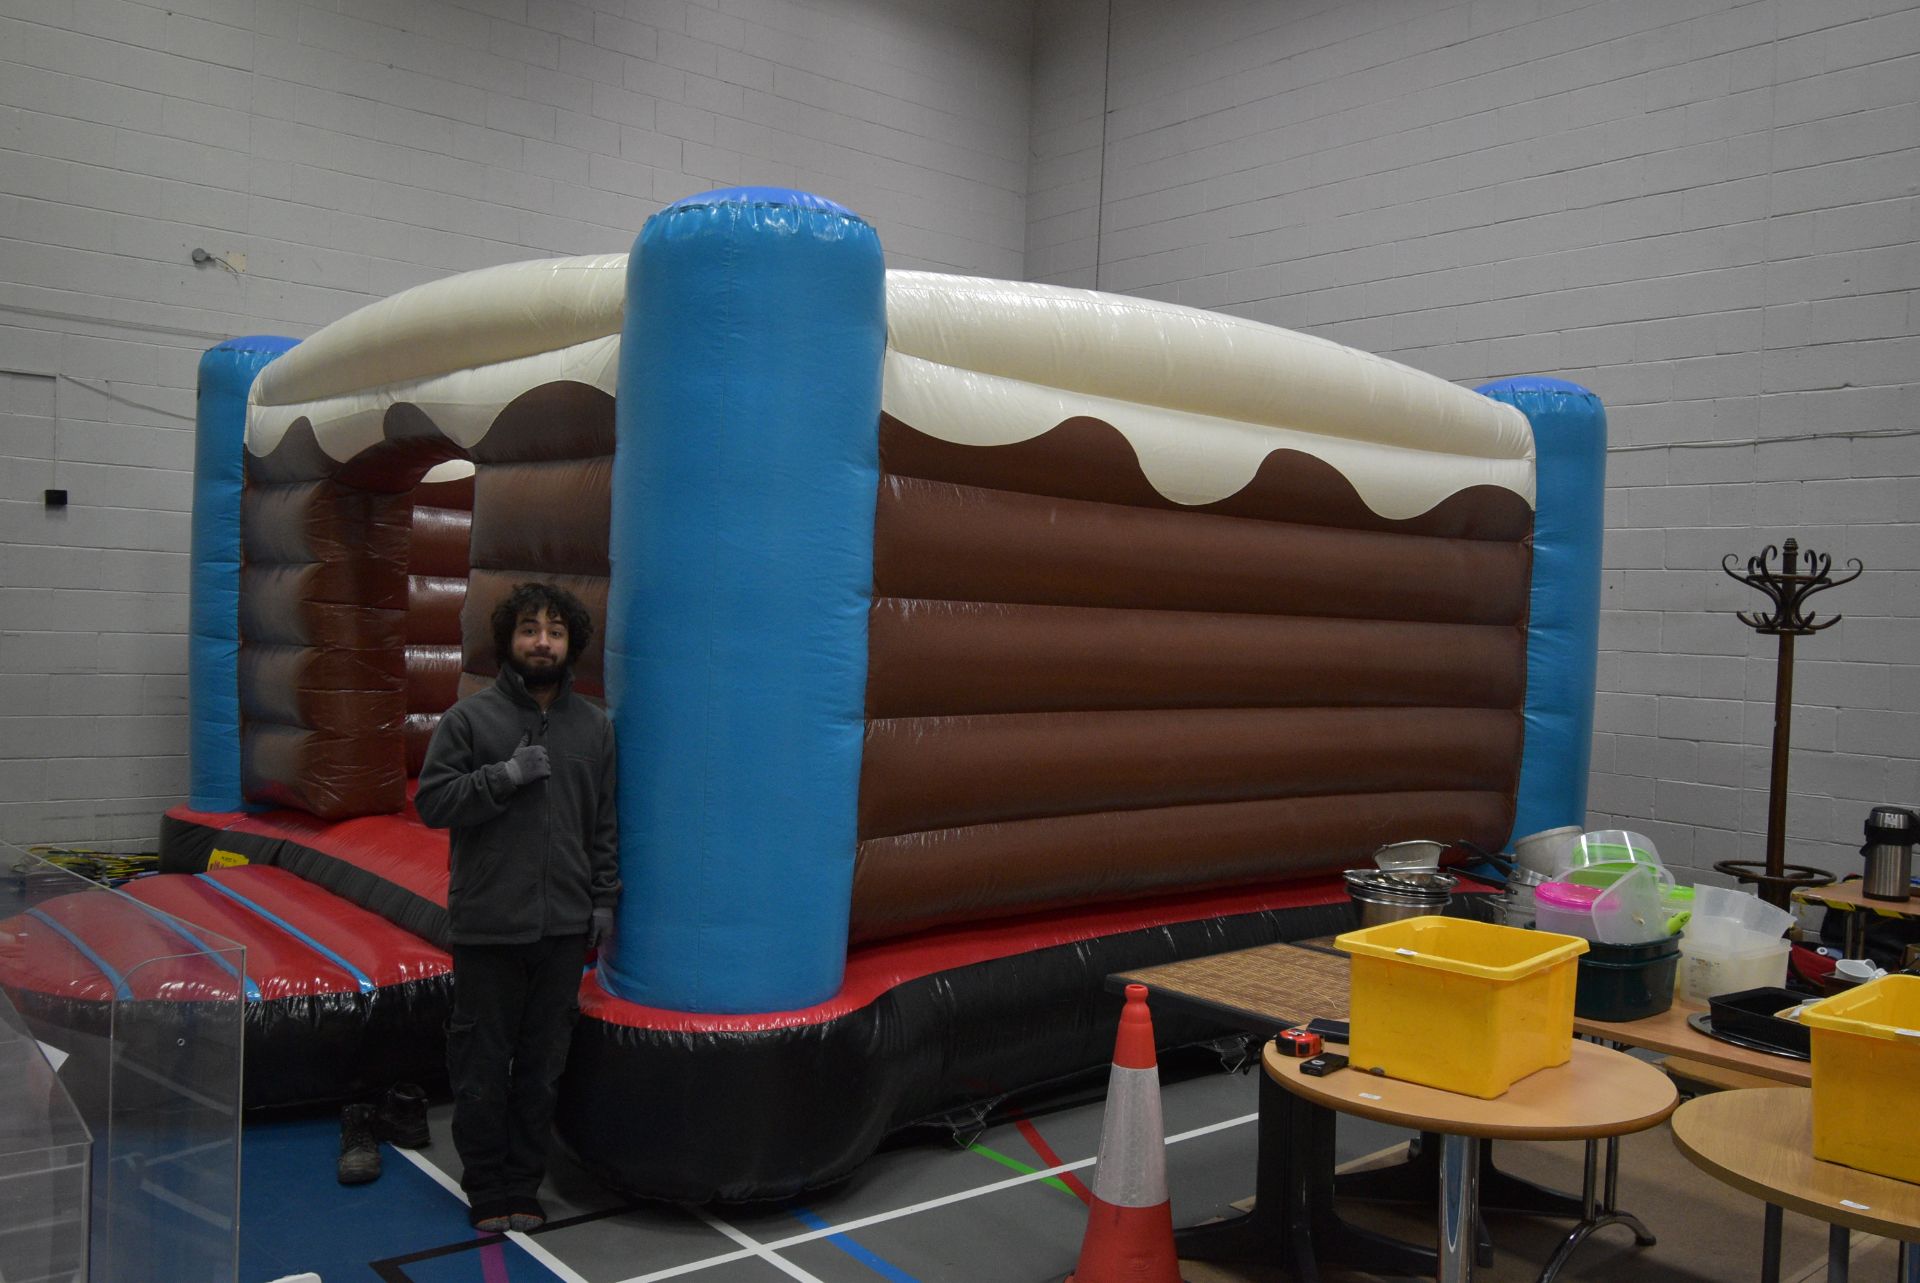 Bouncy Castle ~5x5m x 2.7m high with Pump - Image 2 of 7